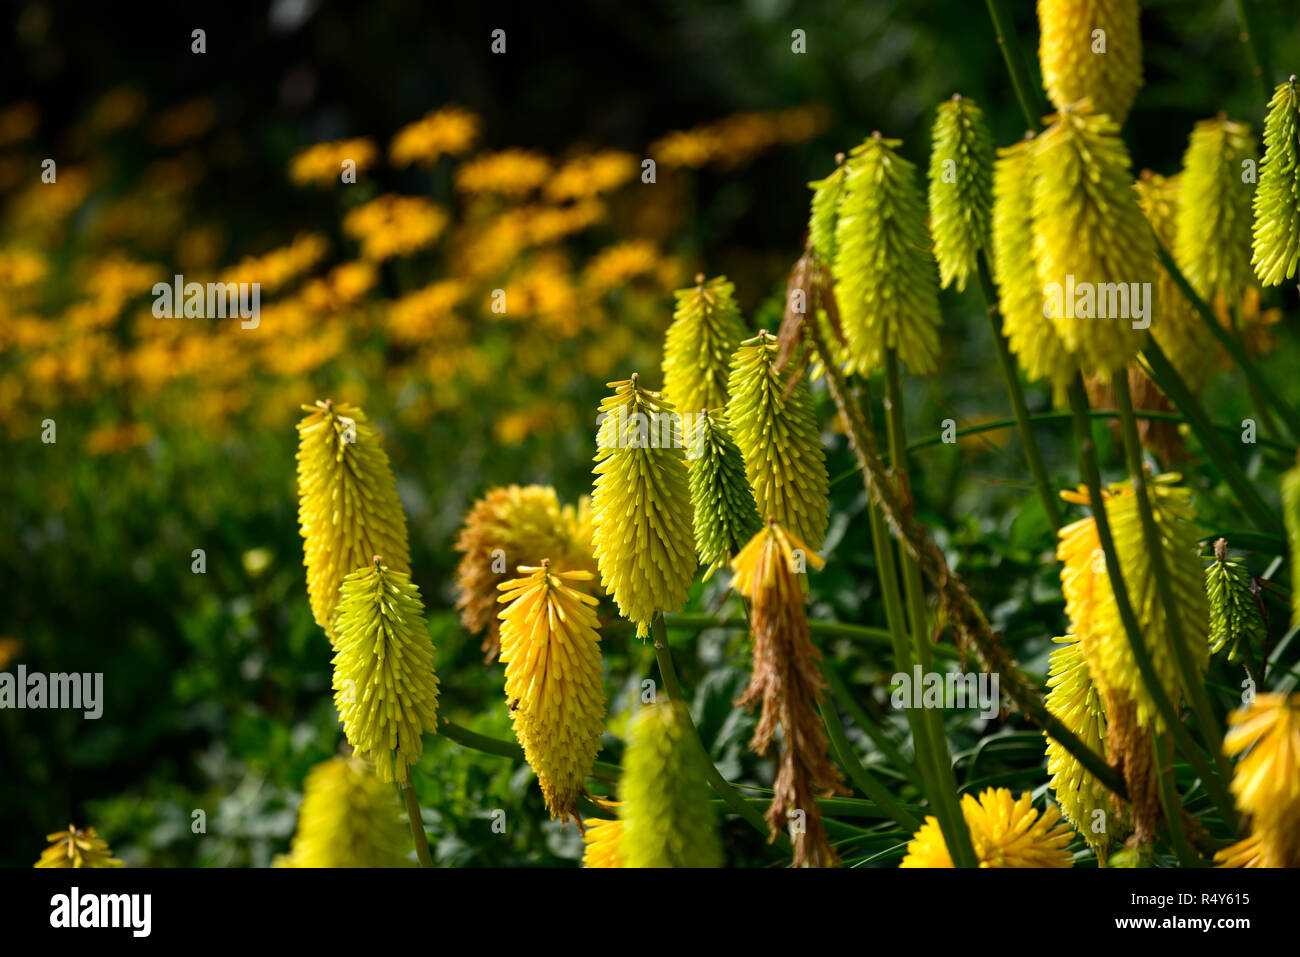 Kniphofia Bees Lemon,torch lily,red hot poker,yellow,tubular flower spike,flowers,flowering,mix,mixed,bed,border,RM Floral Stock Photo